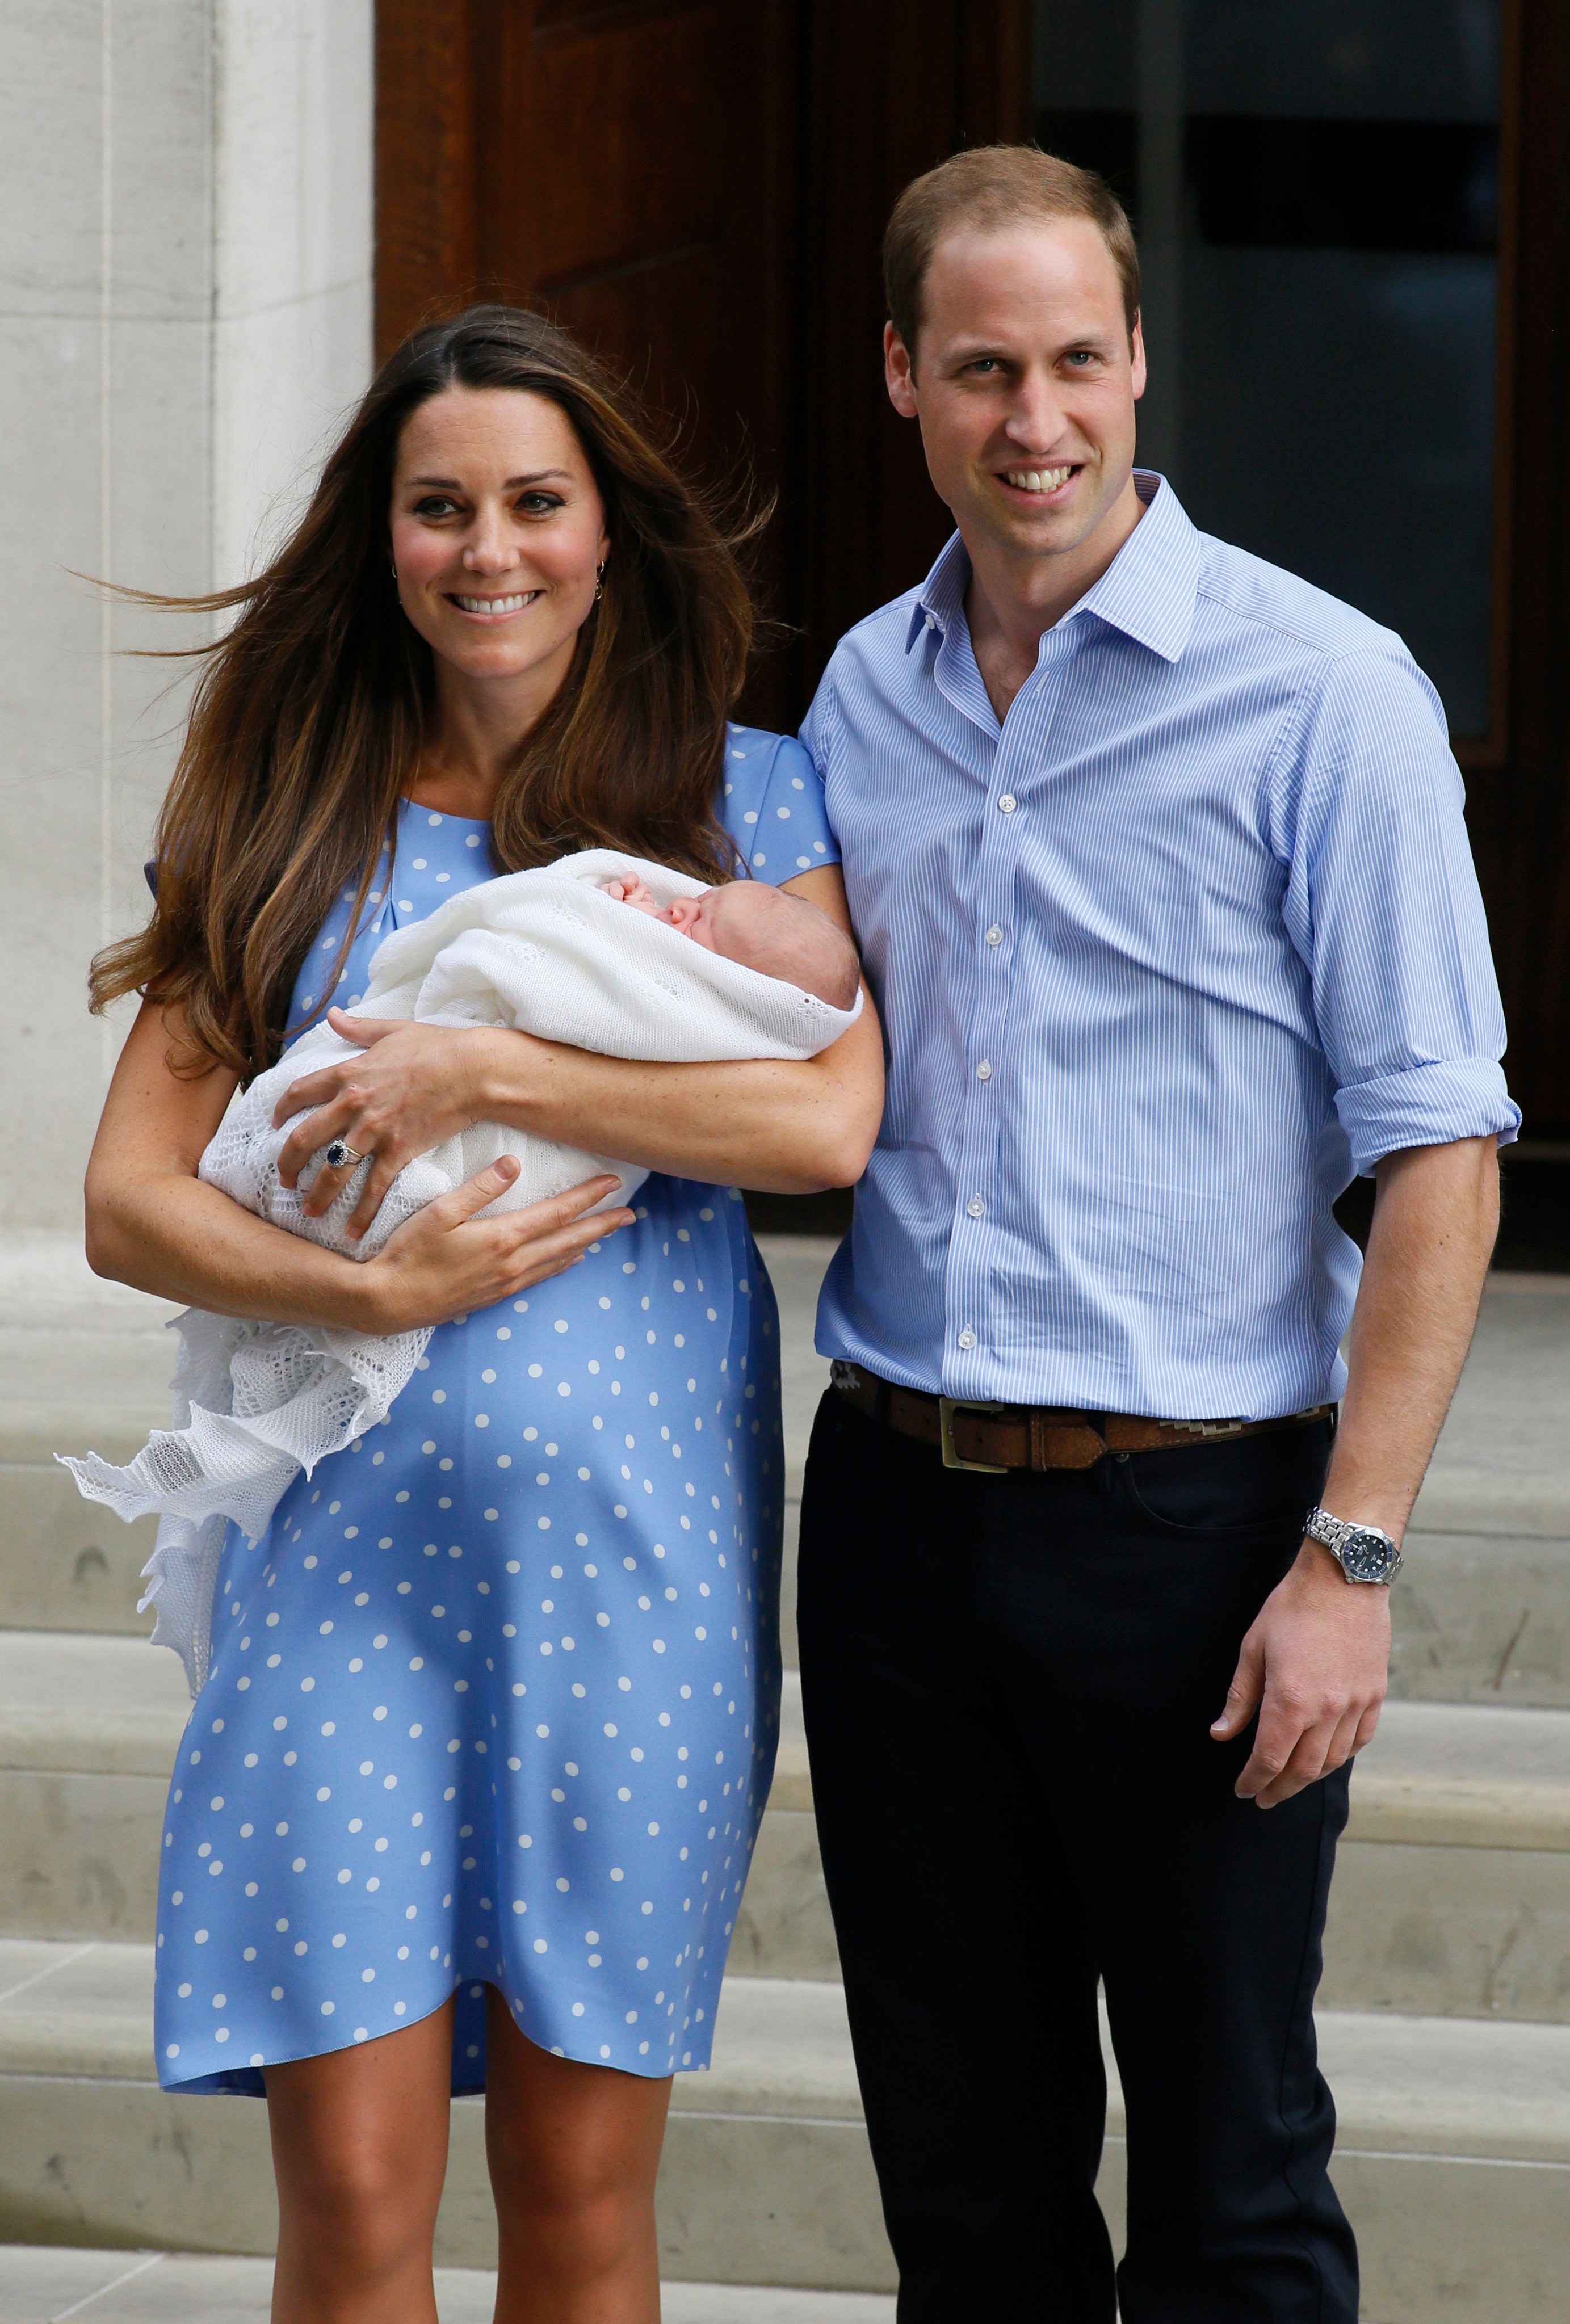 Prince William and Kate Middleton choose where they have medical treatments as carefully as any other royal concerned about their privacy.  Photo: AP 